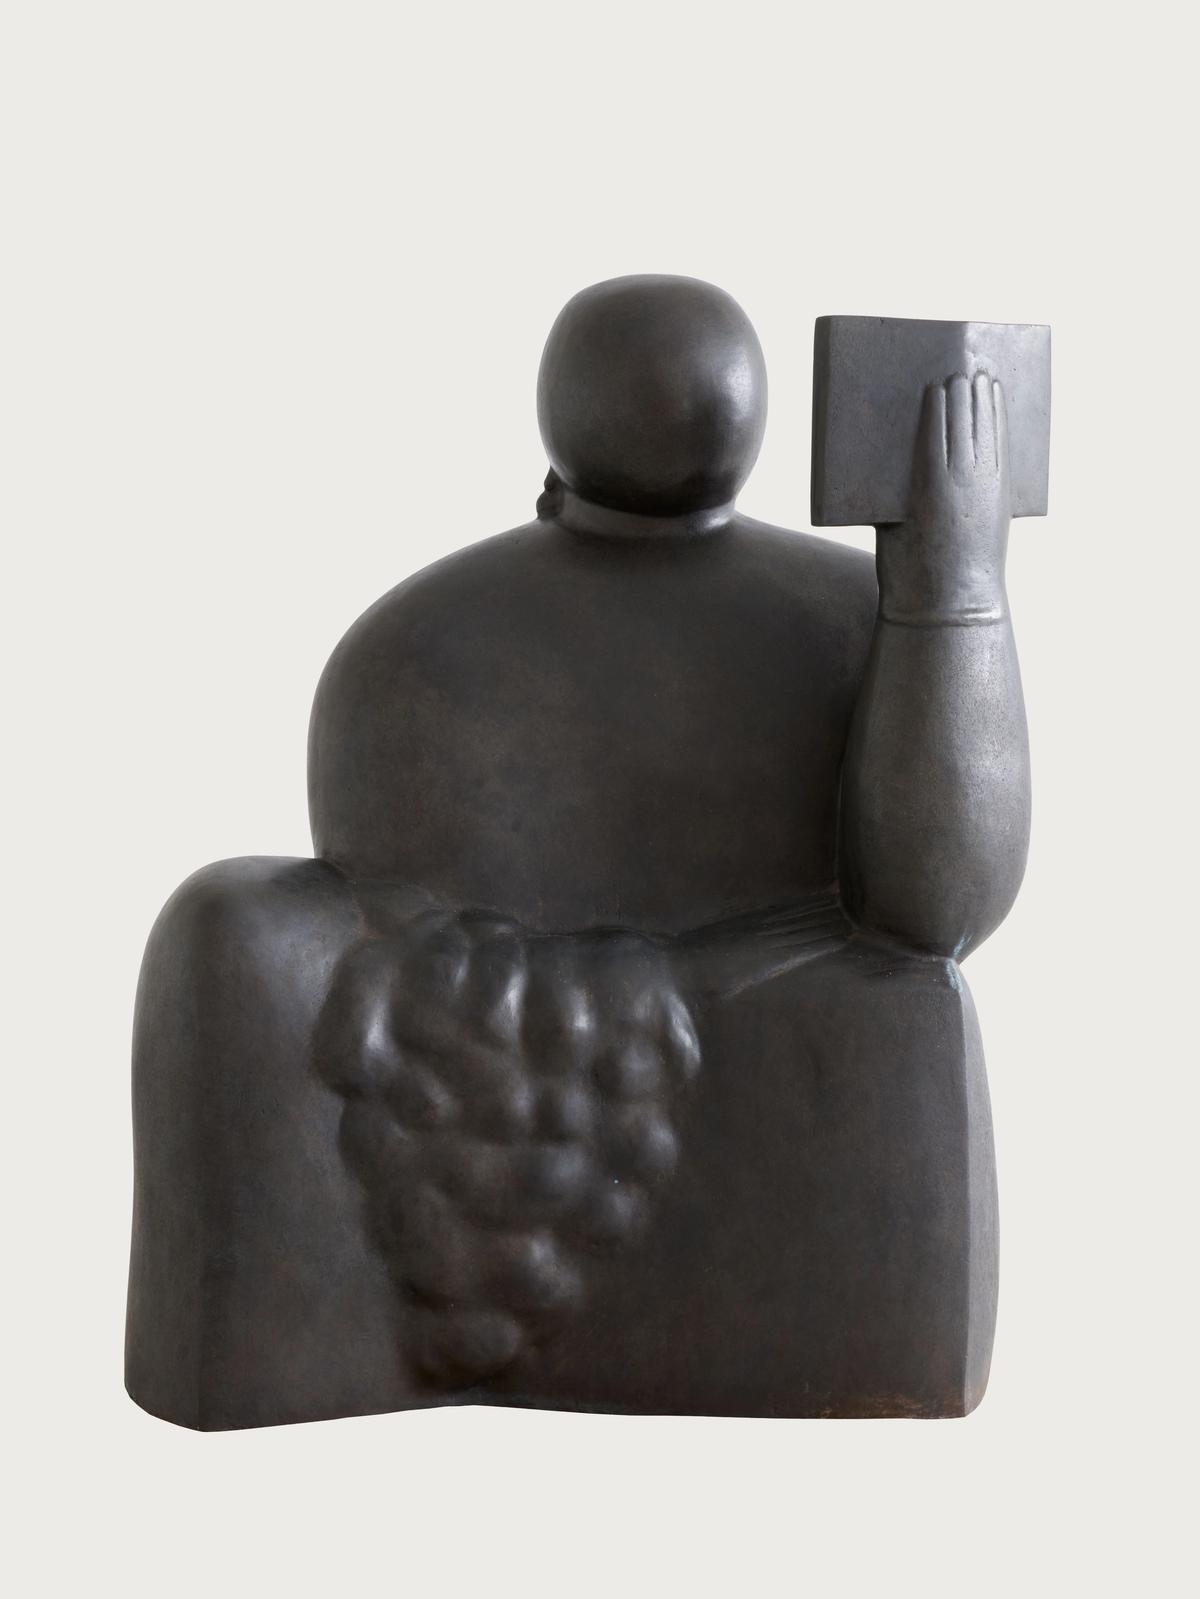 Adam Henein's Big Reader (1995) features in The Farjam Collection of Islamic and Middle Eastern Art